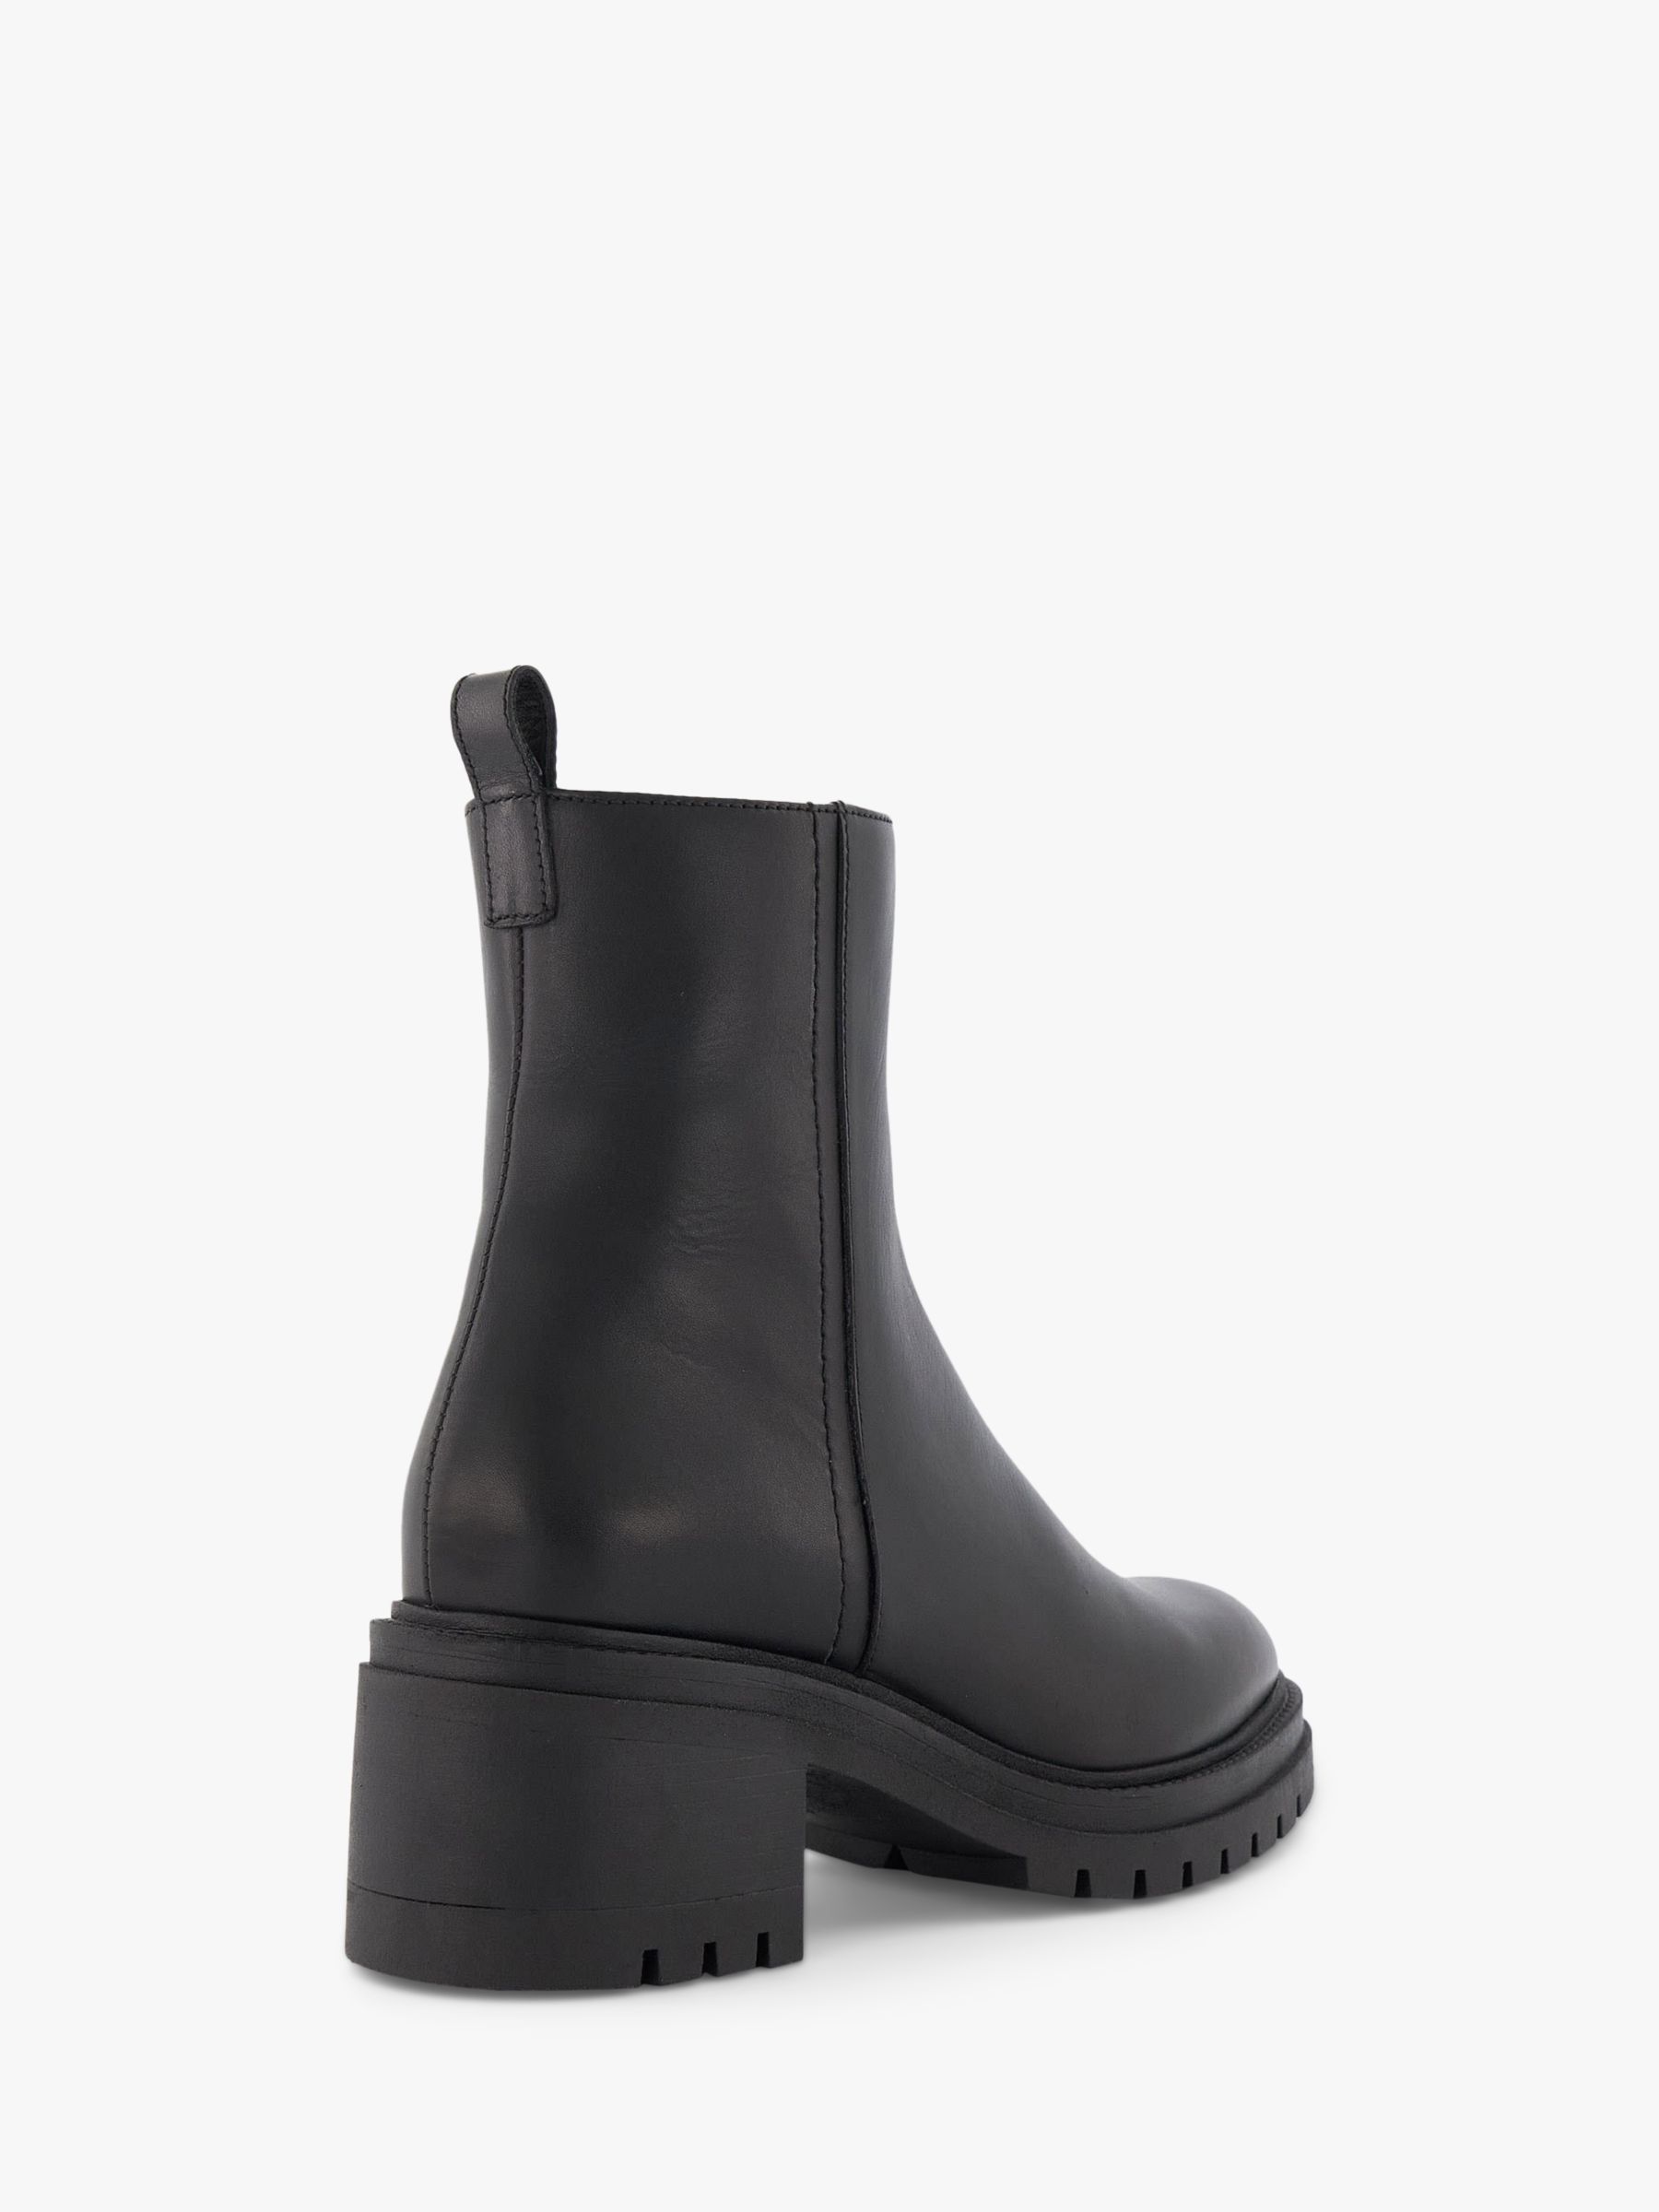 Dune Possessive Leather Ankle Boots, Black at John Lewis & Partners